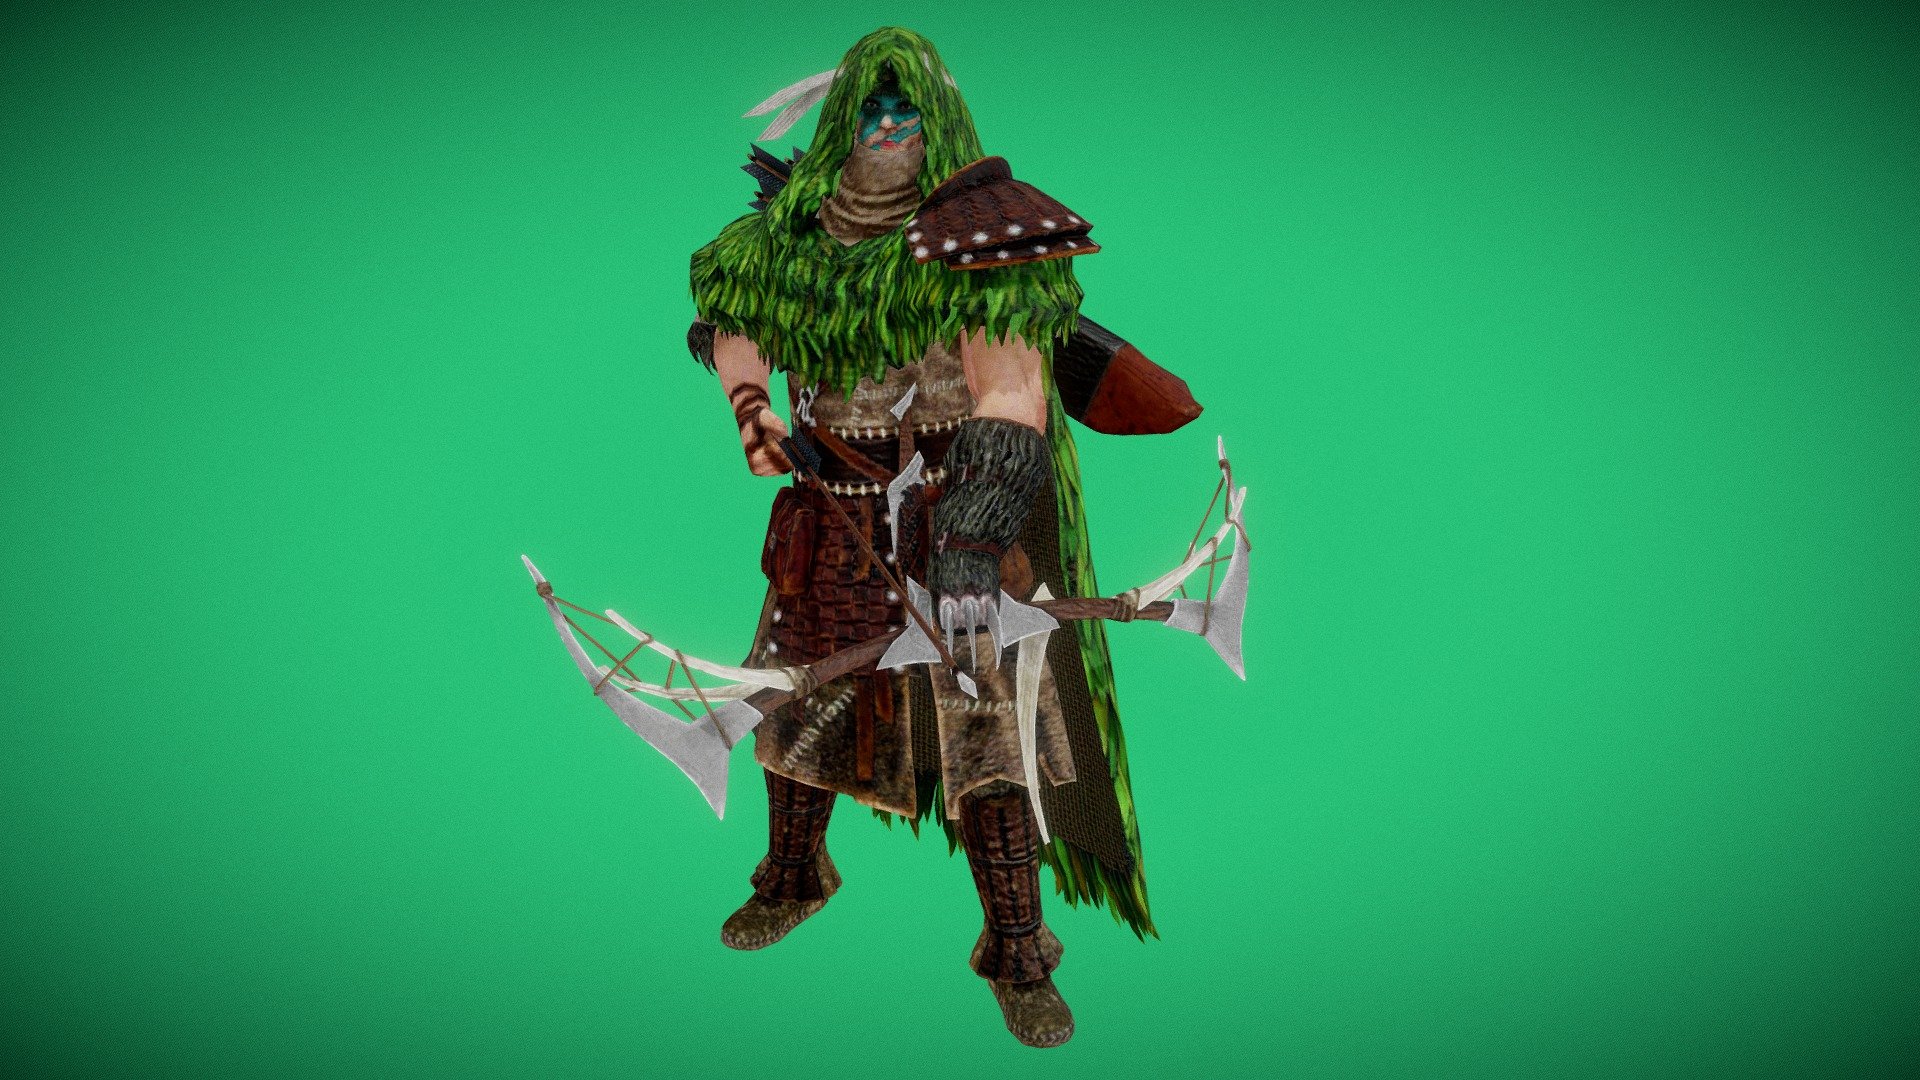 Lowpoly model of Elf Archer ,game ready,rigged, PBR textures. Include weapons and nude mesh. Ready to import into various game engine like UE4 and Unity. Include nude meshes This character would work well as an NPC, a rank-and-file enemy, or a boss for a fantasy game. This character is of different proportions than the standard Epic Skeleton. The visualization of this character was done in Blender, Substance Painter. The rendering result in other versions with different settings may vary.

+Total poly count for each body version (include weapons)

+Rigging use FBX skin. Full body rig and basic facial rig.

+PBR textures (Metallic-Roughness) . DirectX Normal Maps. .PNG format.

Let me know if you have any questions, I’ll be glad to help! - Elf Archer - Buy Royalty Free 3D model by Luna Studio (@StudioLuna) 3d model